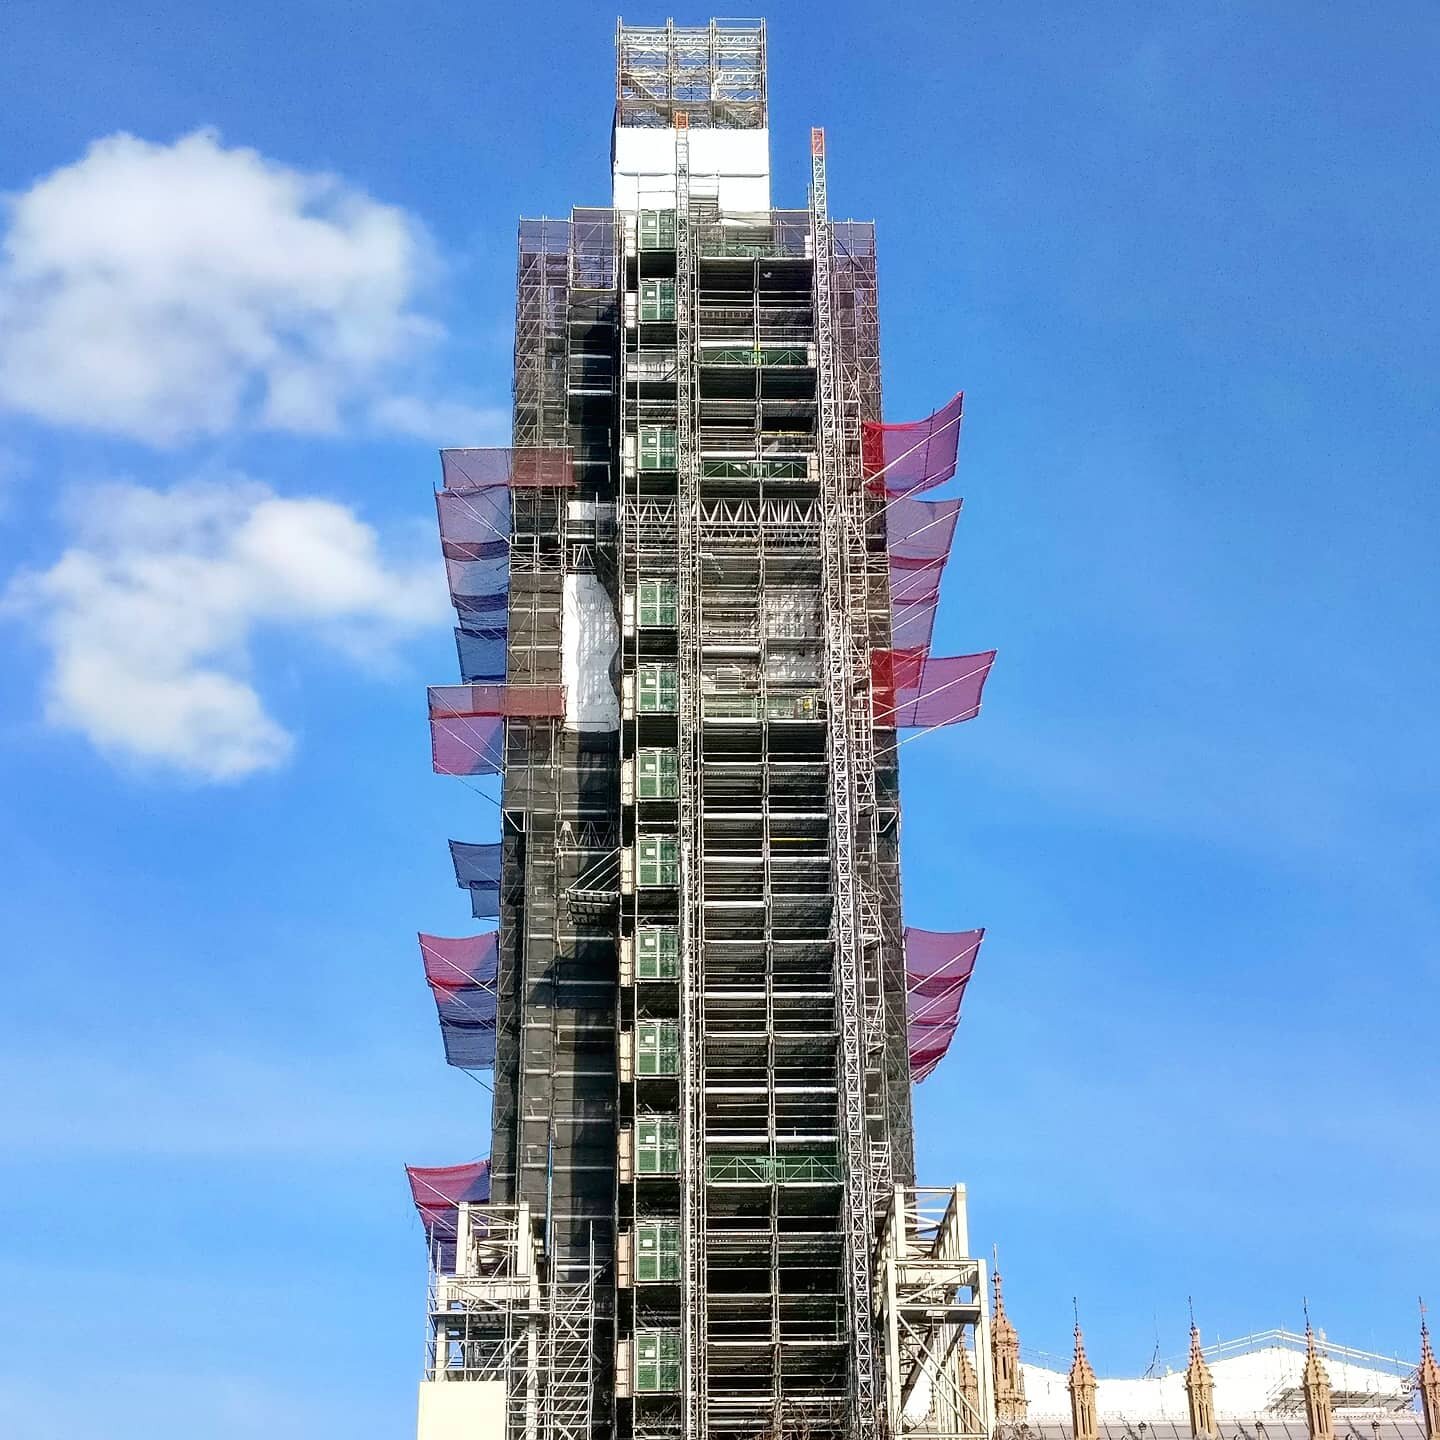 Big Ben. Yes, this is the clocktower Big Ben in London, England. During a visit in 2019, the tower was under a restorative maintenance program. This required the construction of scaffolding that wrapped around the tower for its fill height. The tower